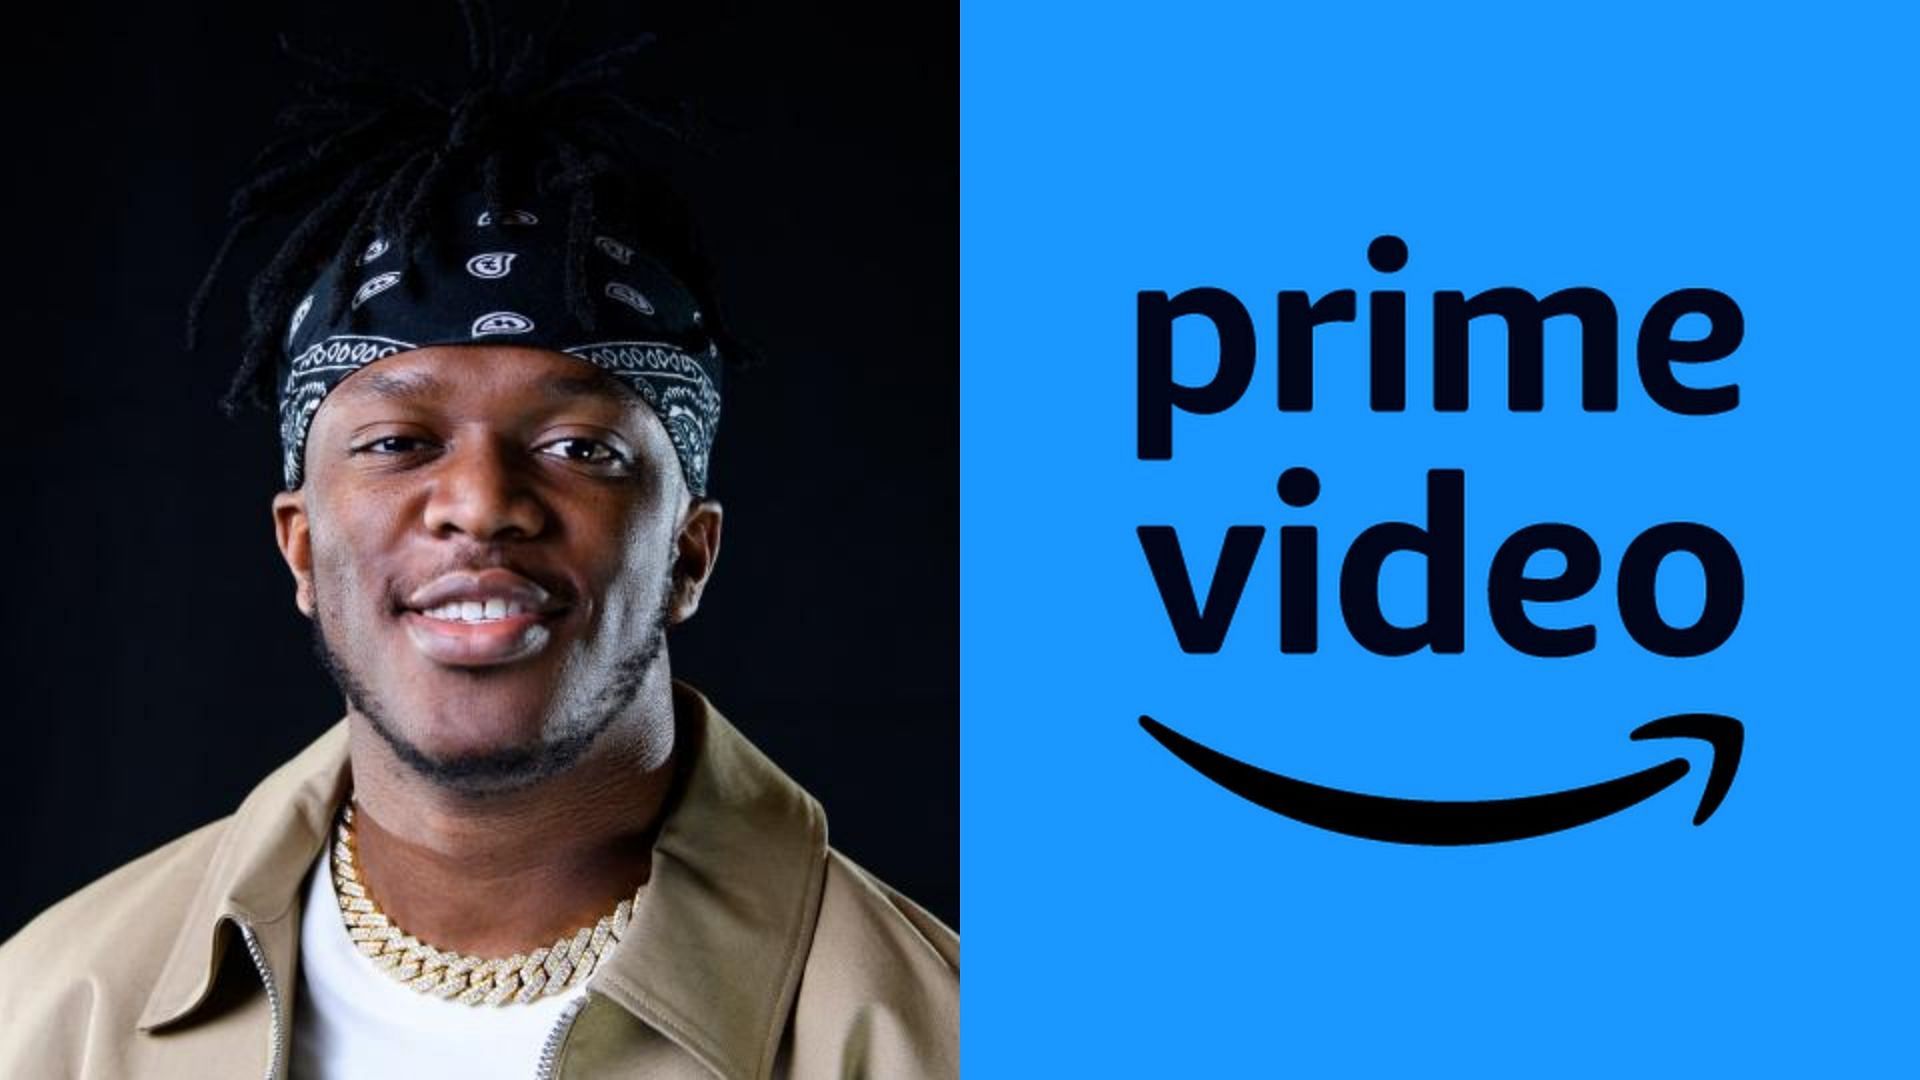 KSI reveals the date for his official documentary on Amazon Prime